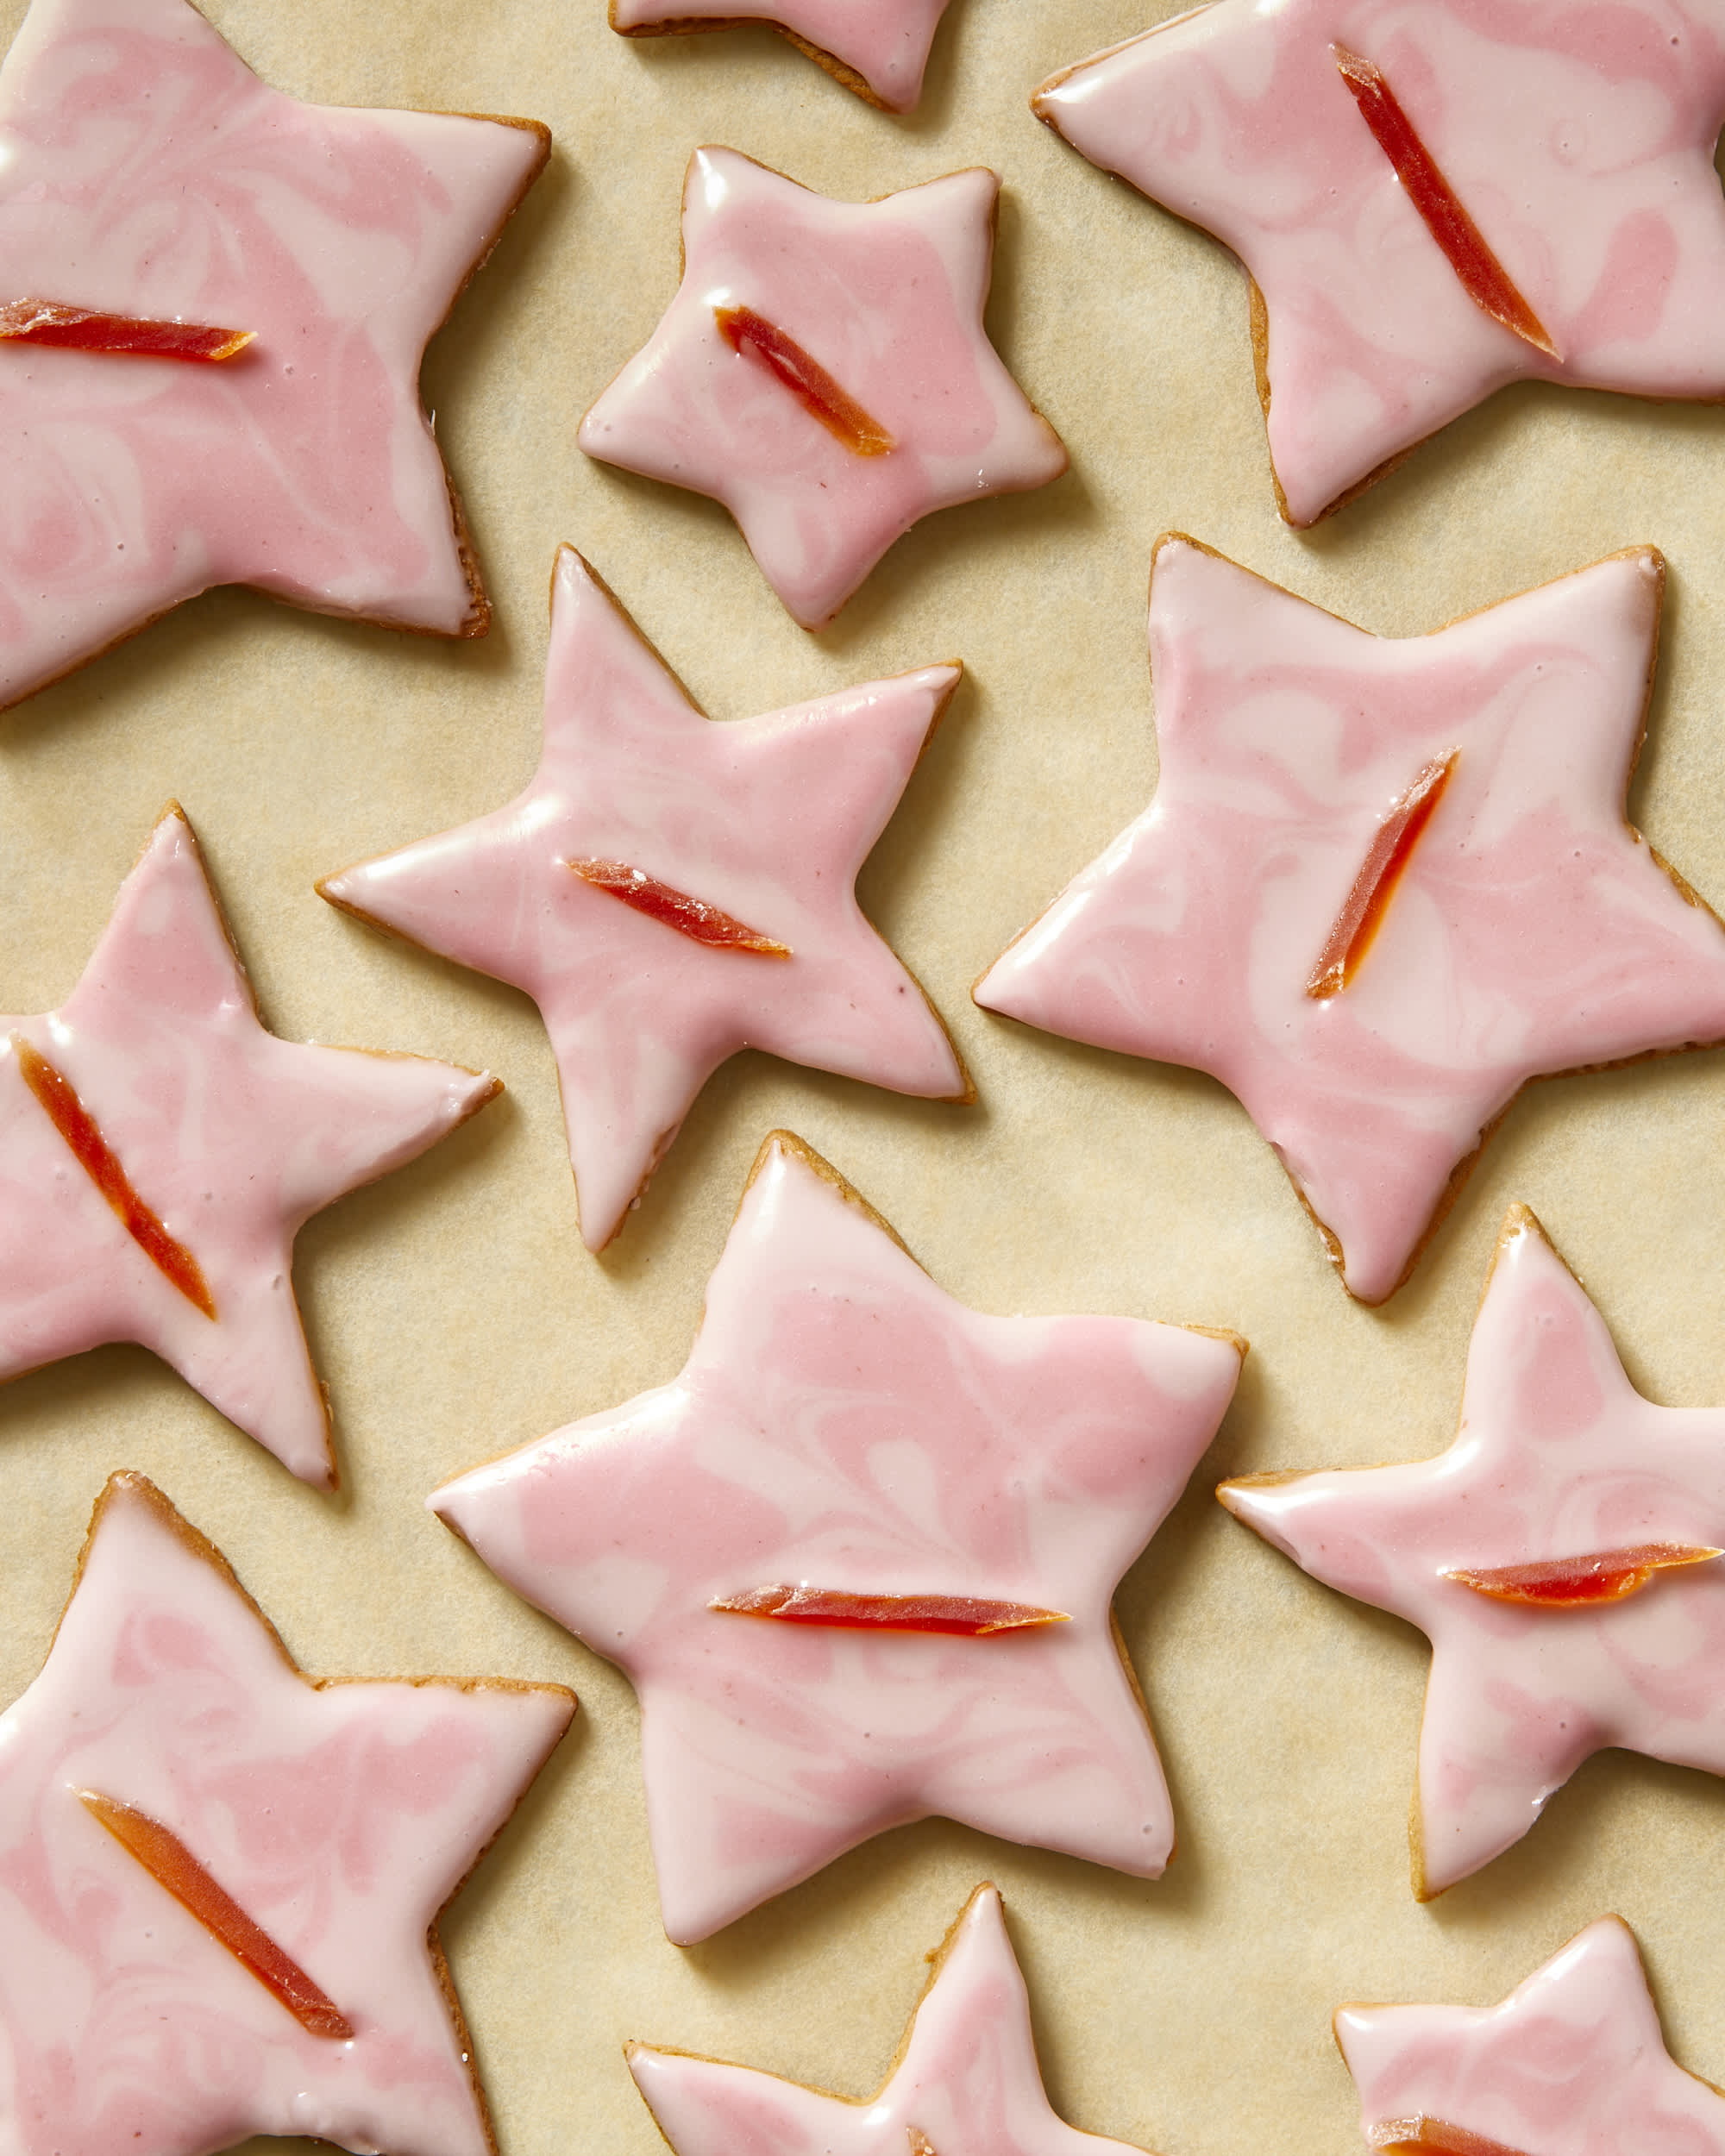 Gingerbread cookies as stars shape for Christmas, on a parchment